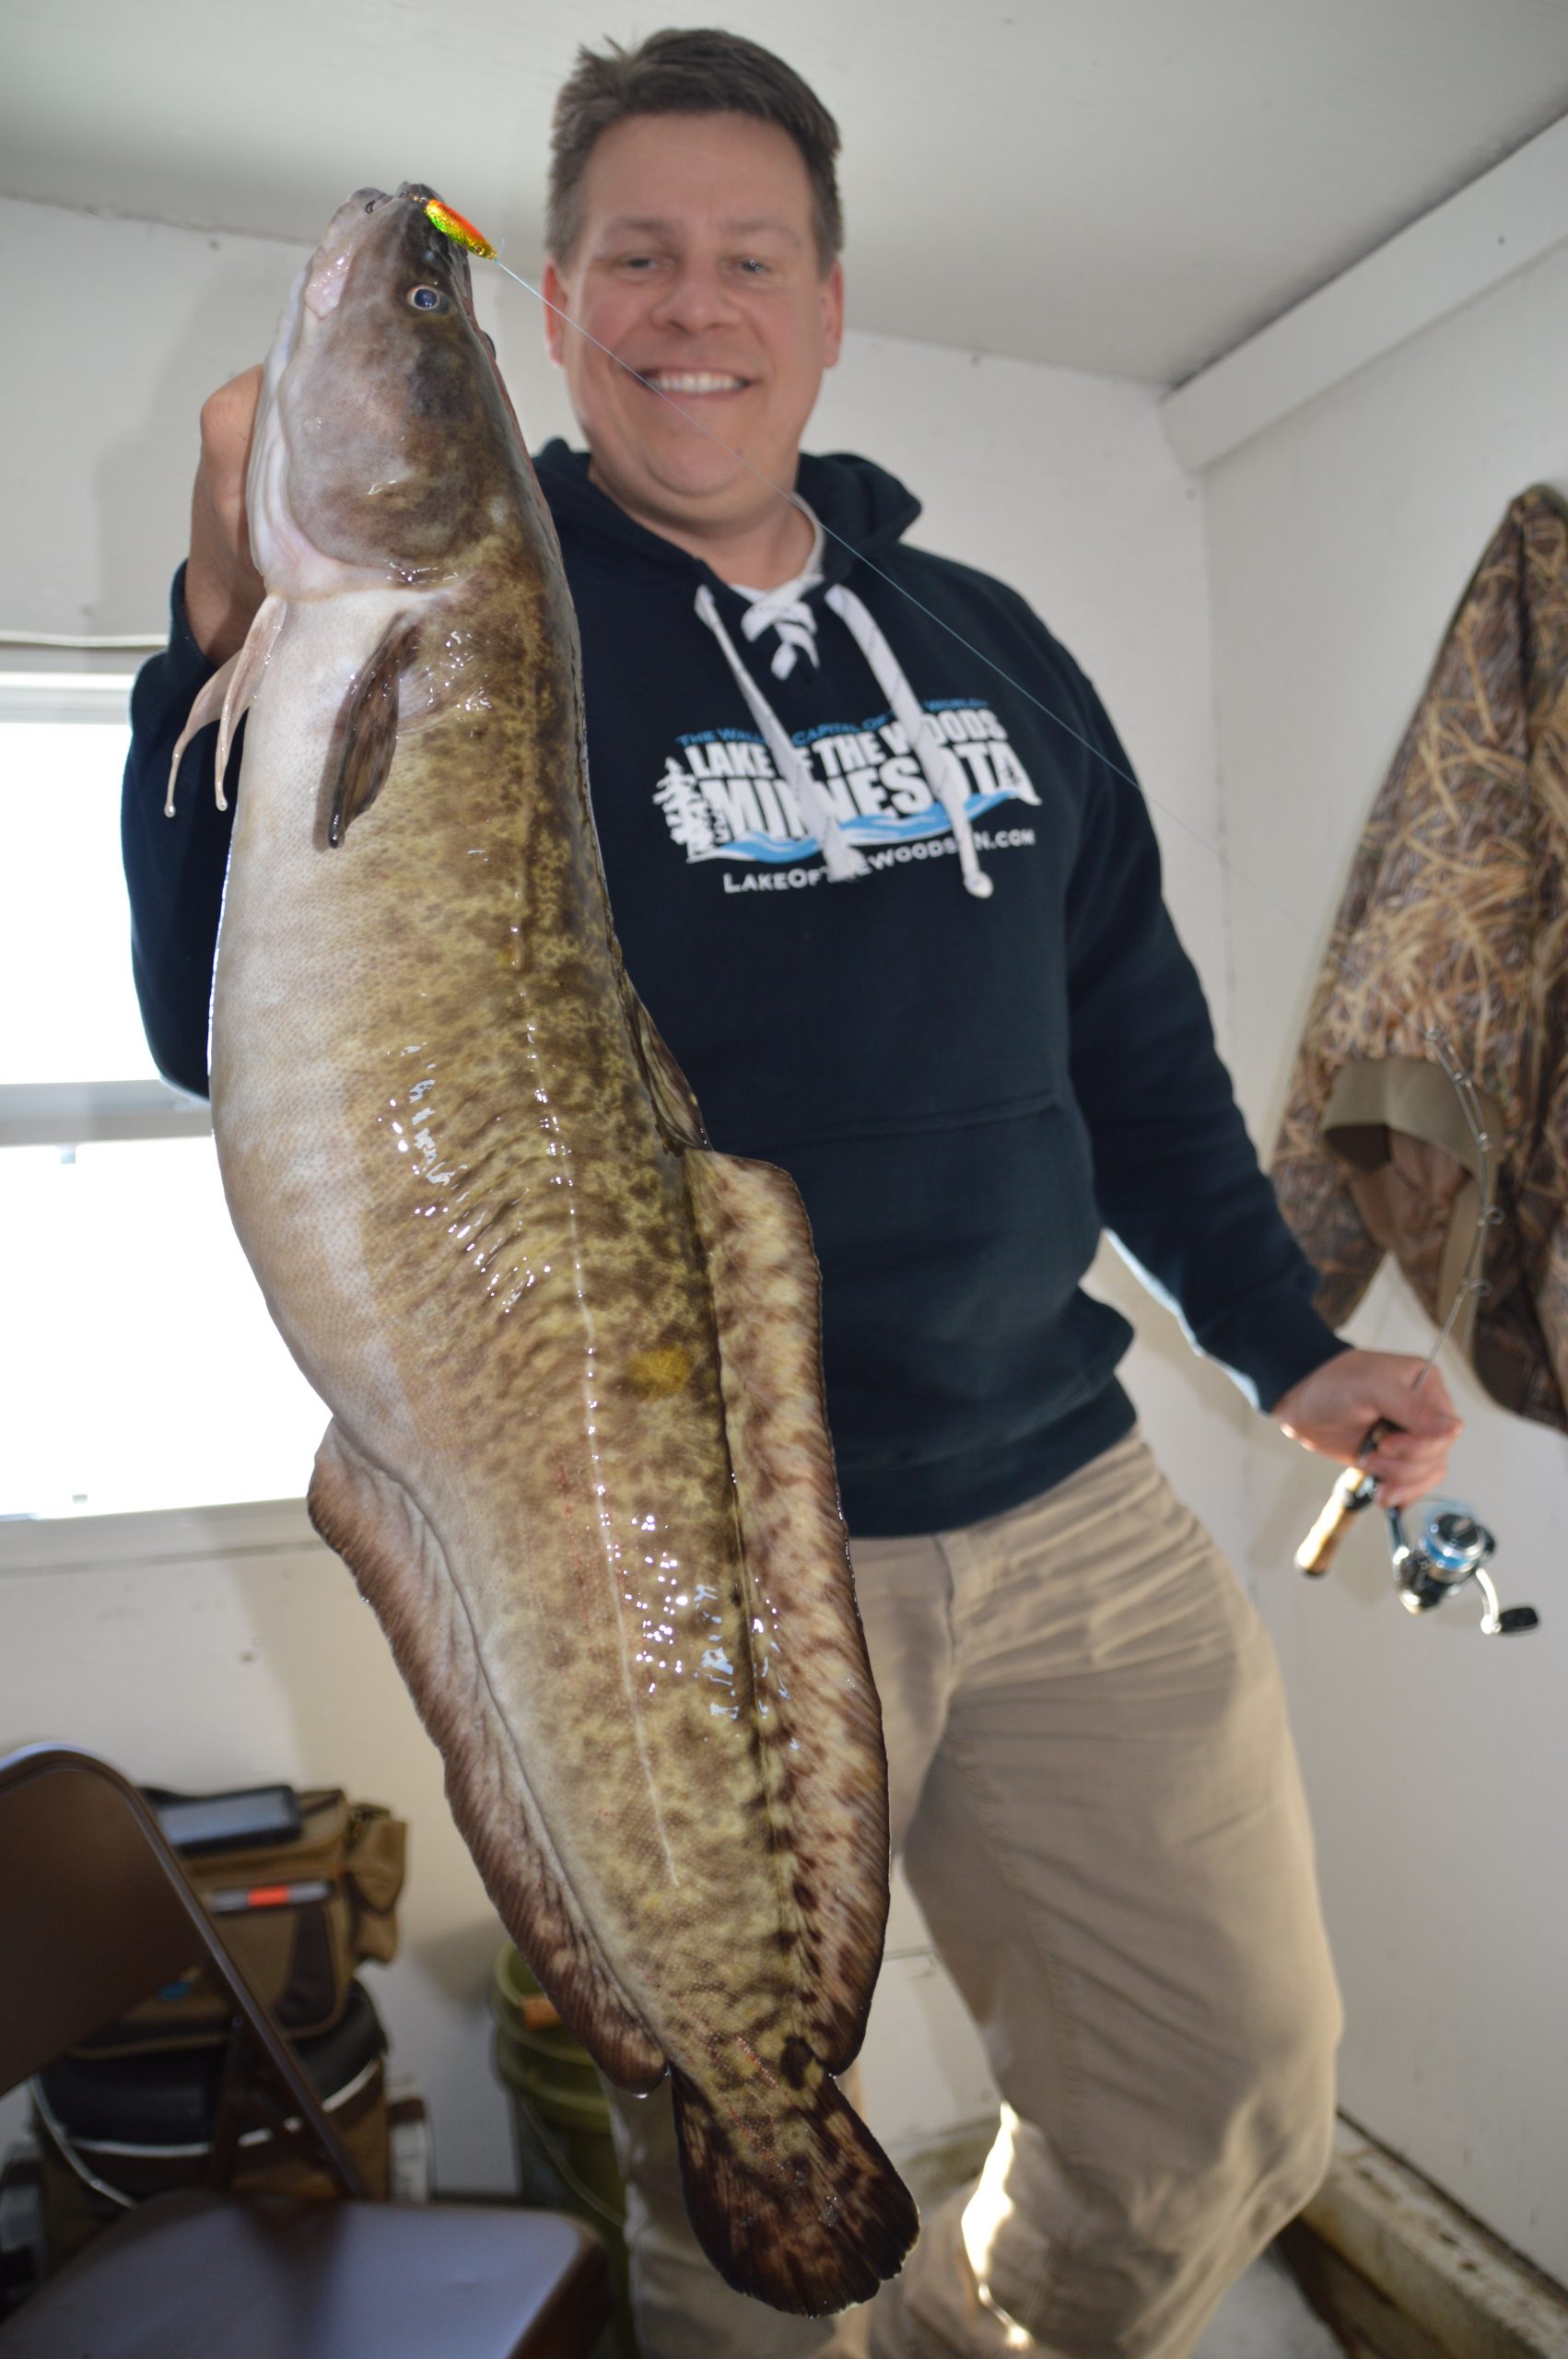 The eelpout capital of the world? Lake of the Woods is loaded with